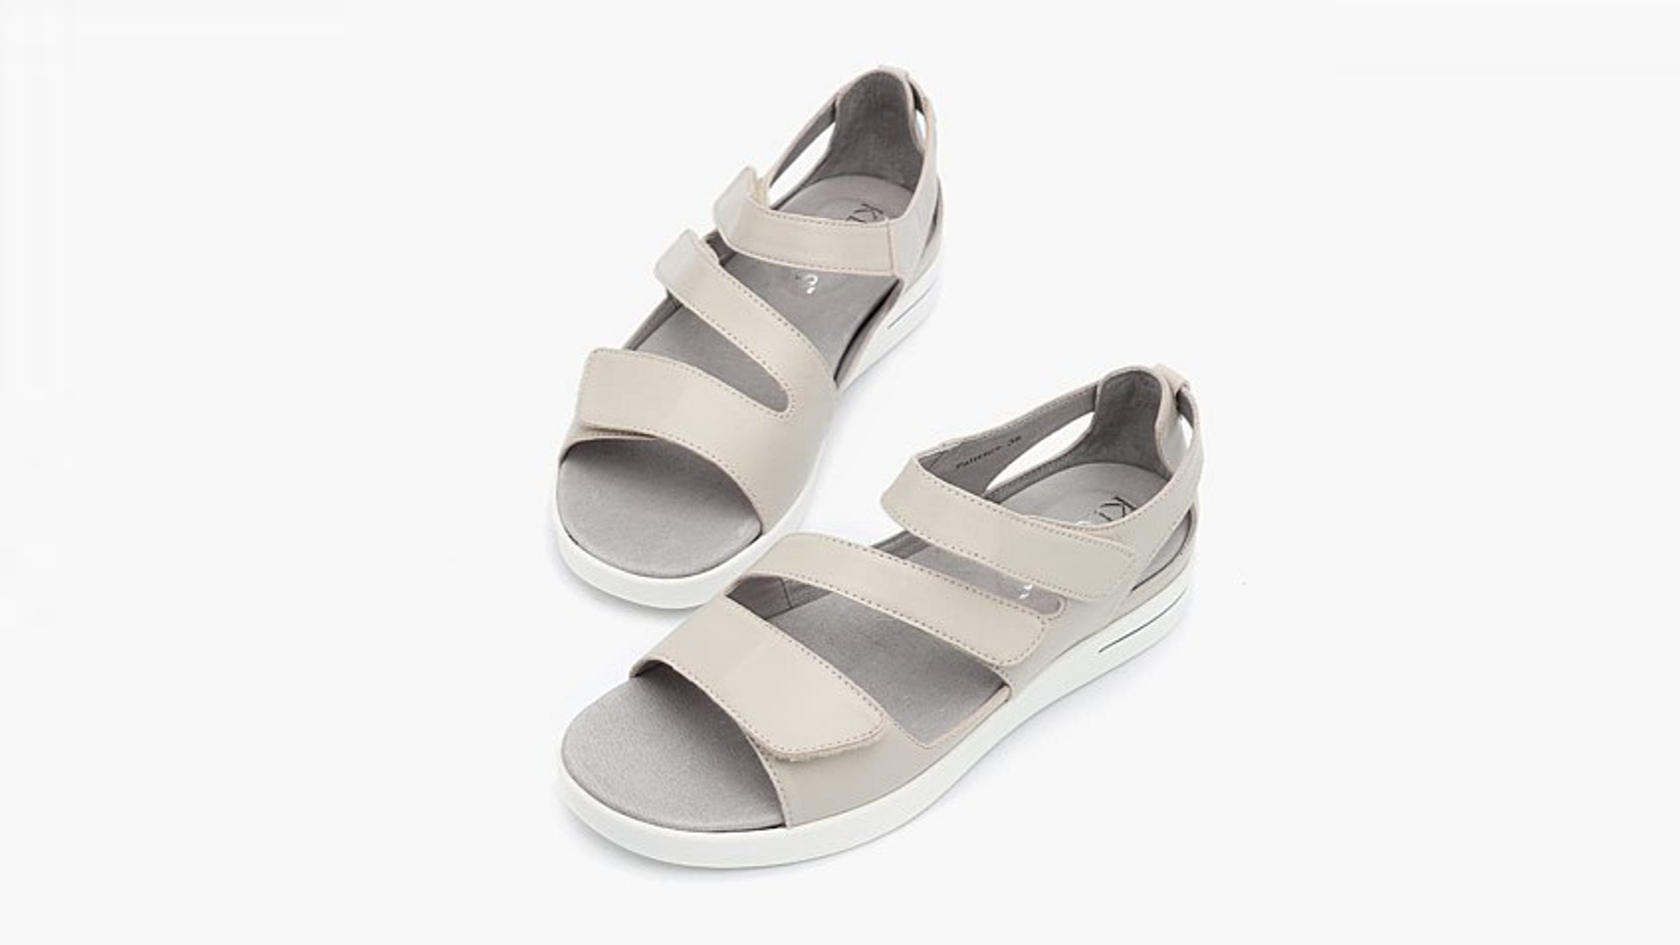 Pair of Taupe Patience sandals on a white background